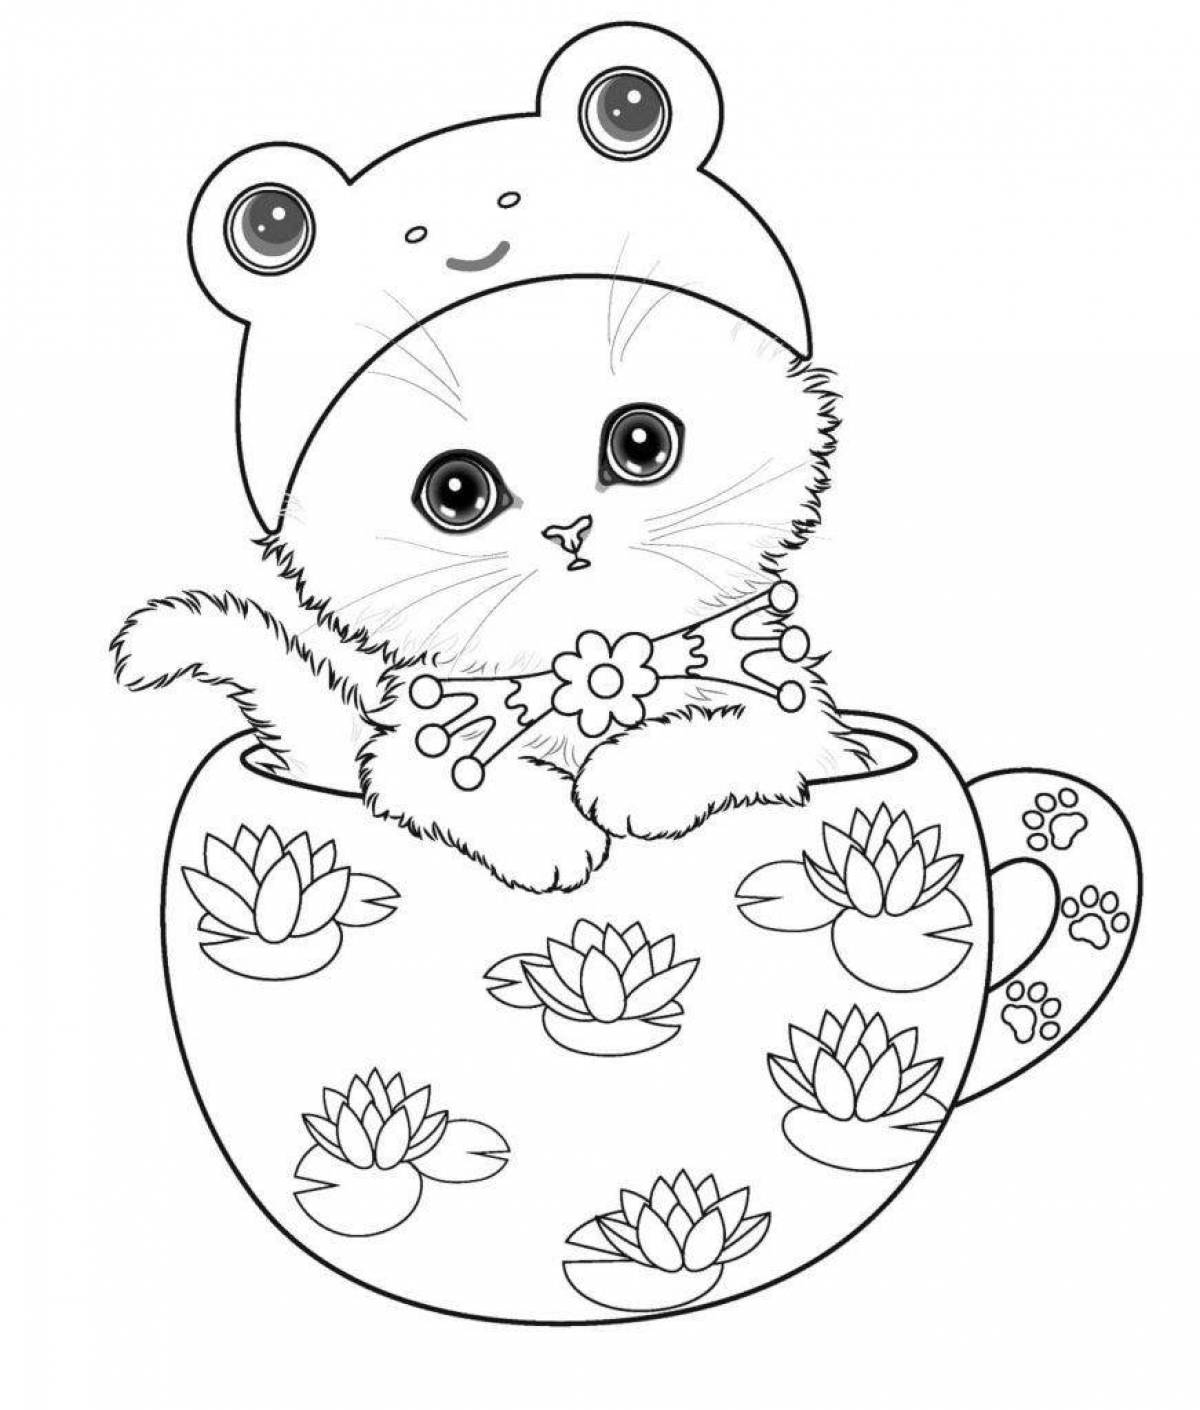 Animated cat coloring pages for girls